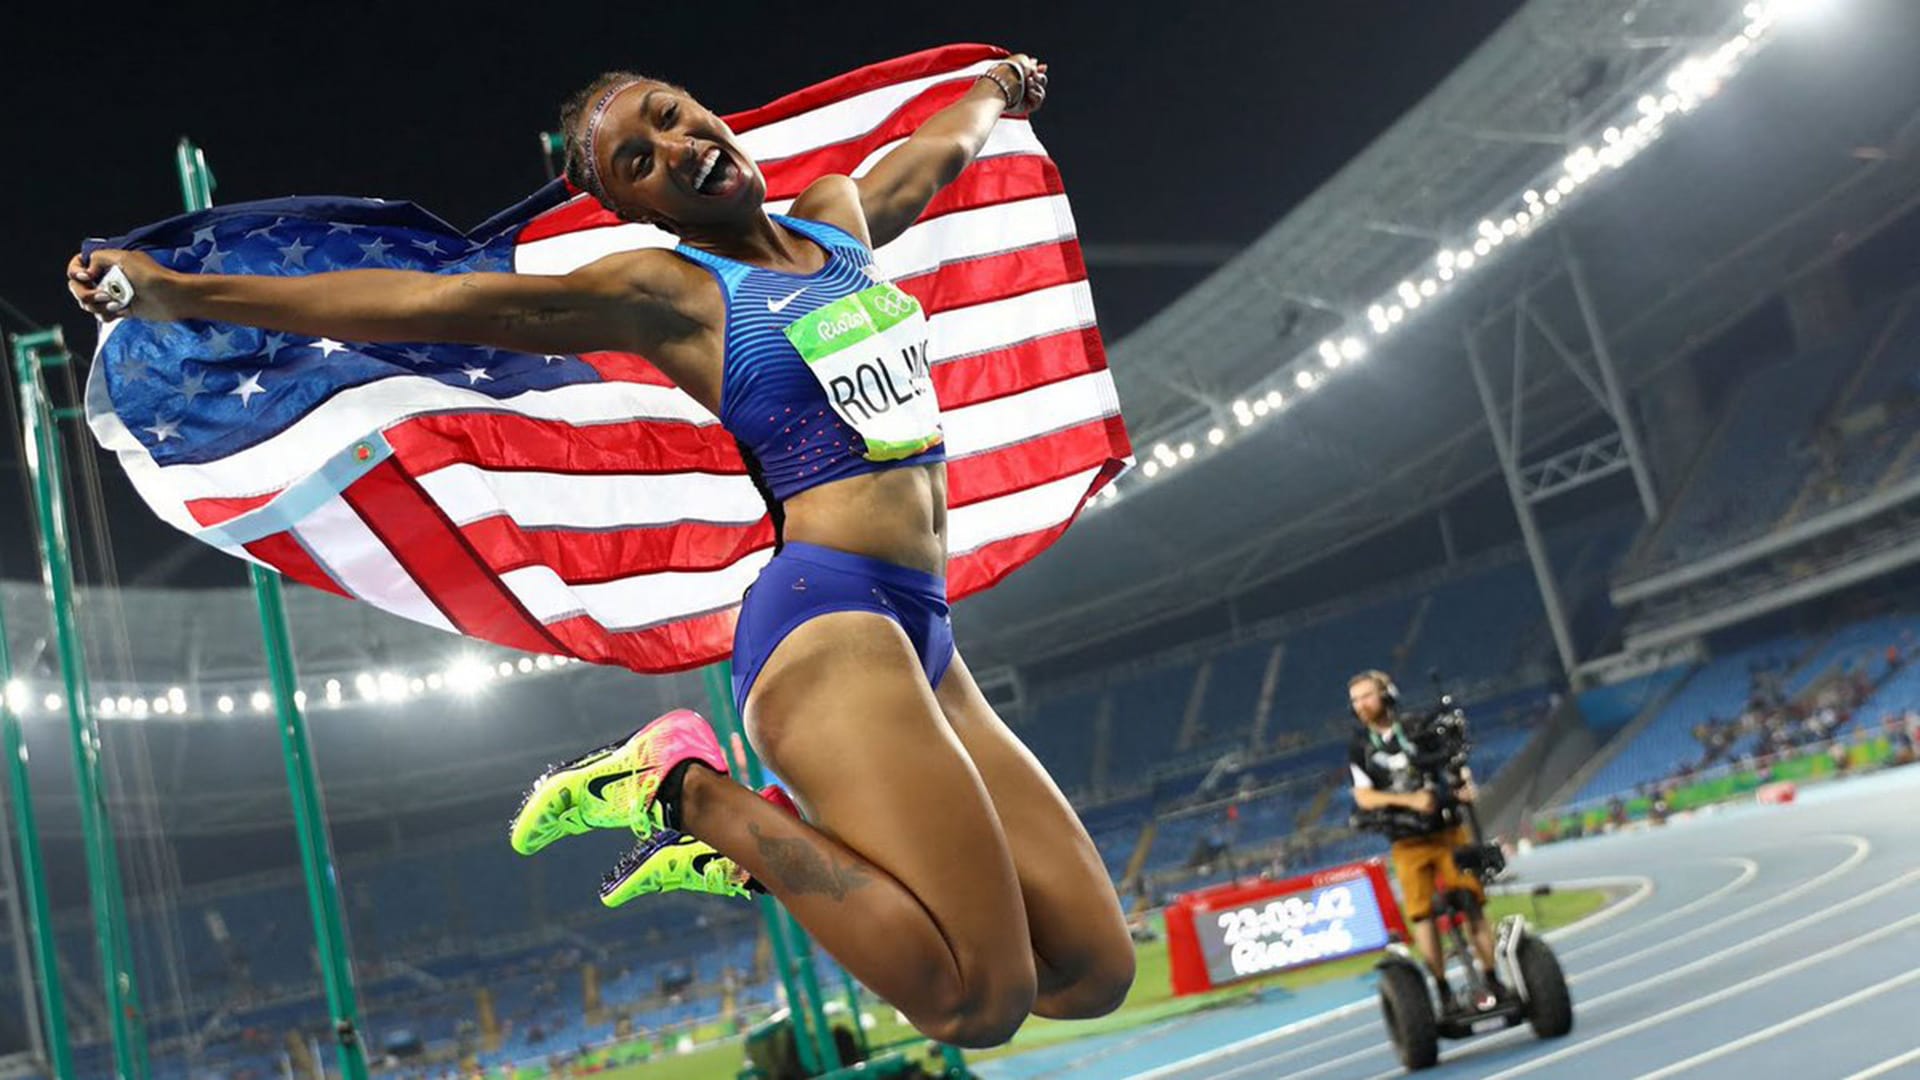 Congratulations to Miami Hurdler Brianna Rollins Winning Olympic Gold